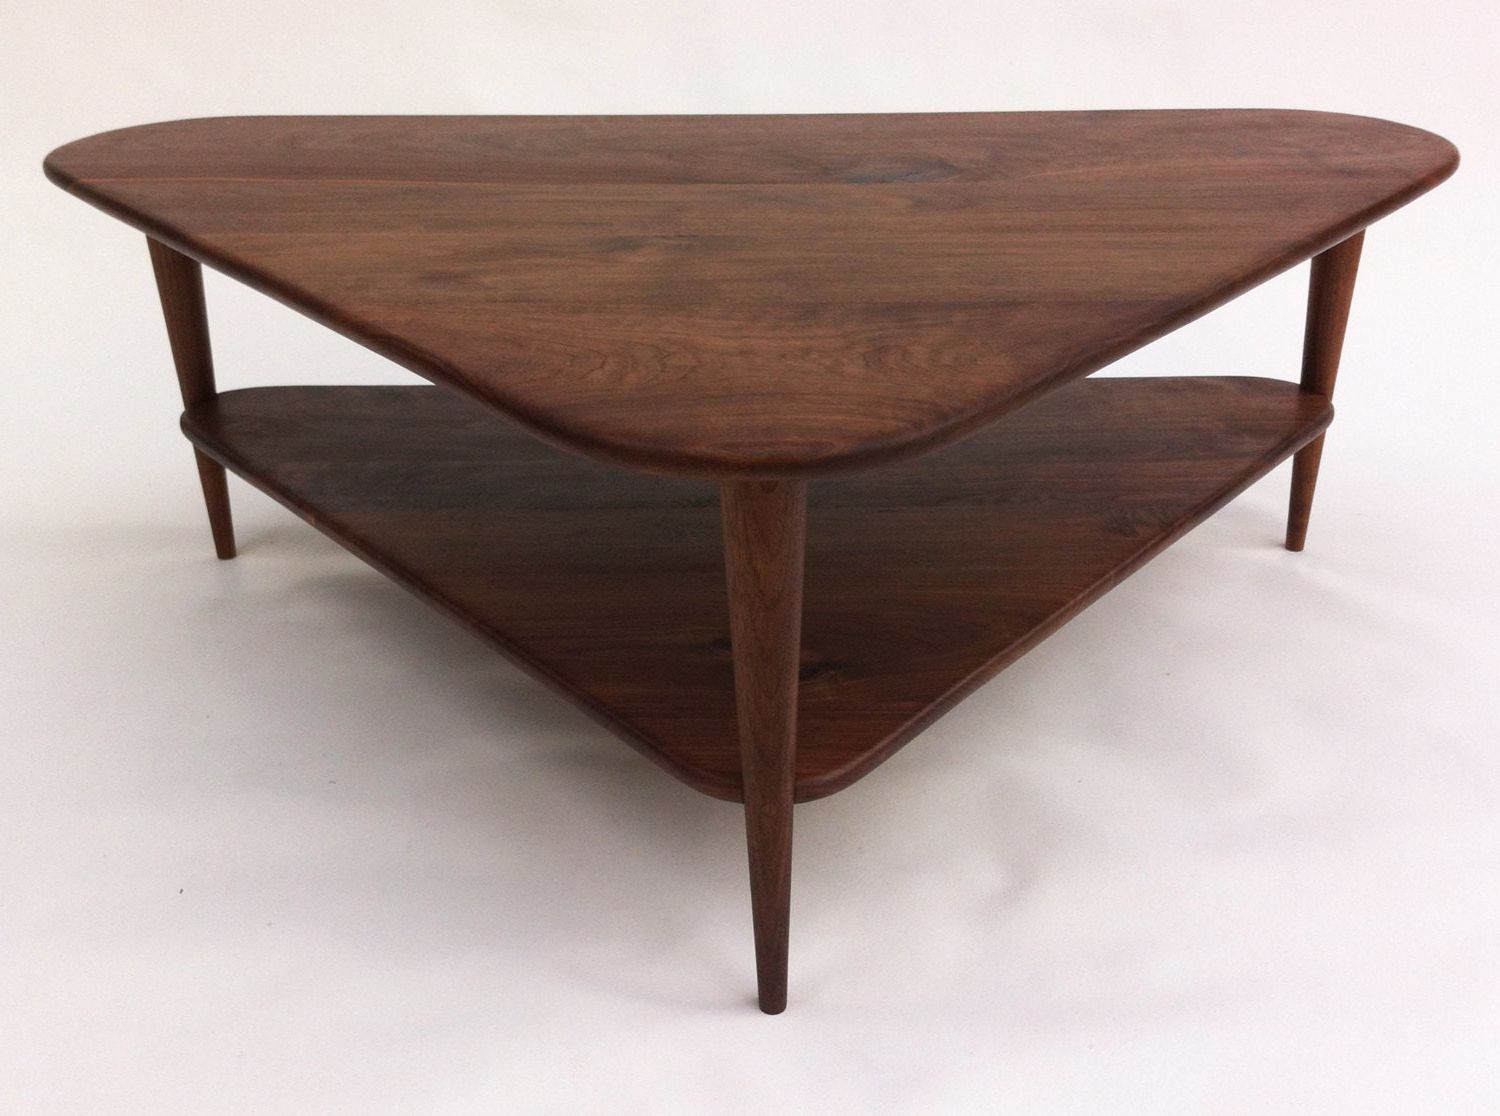 Well Known White Triangular Coffee Tables Inside Mid Century Modern Coffee Table W/ Shelf Triangle Cocktail (View 13 of 20)